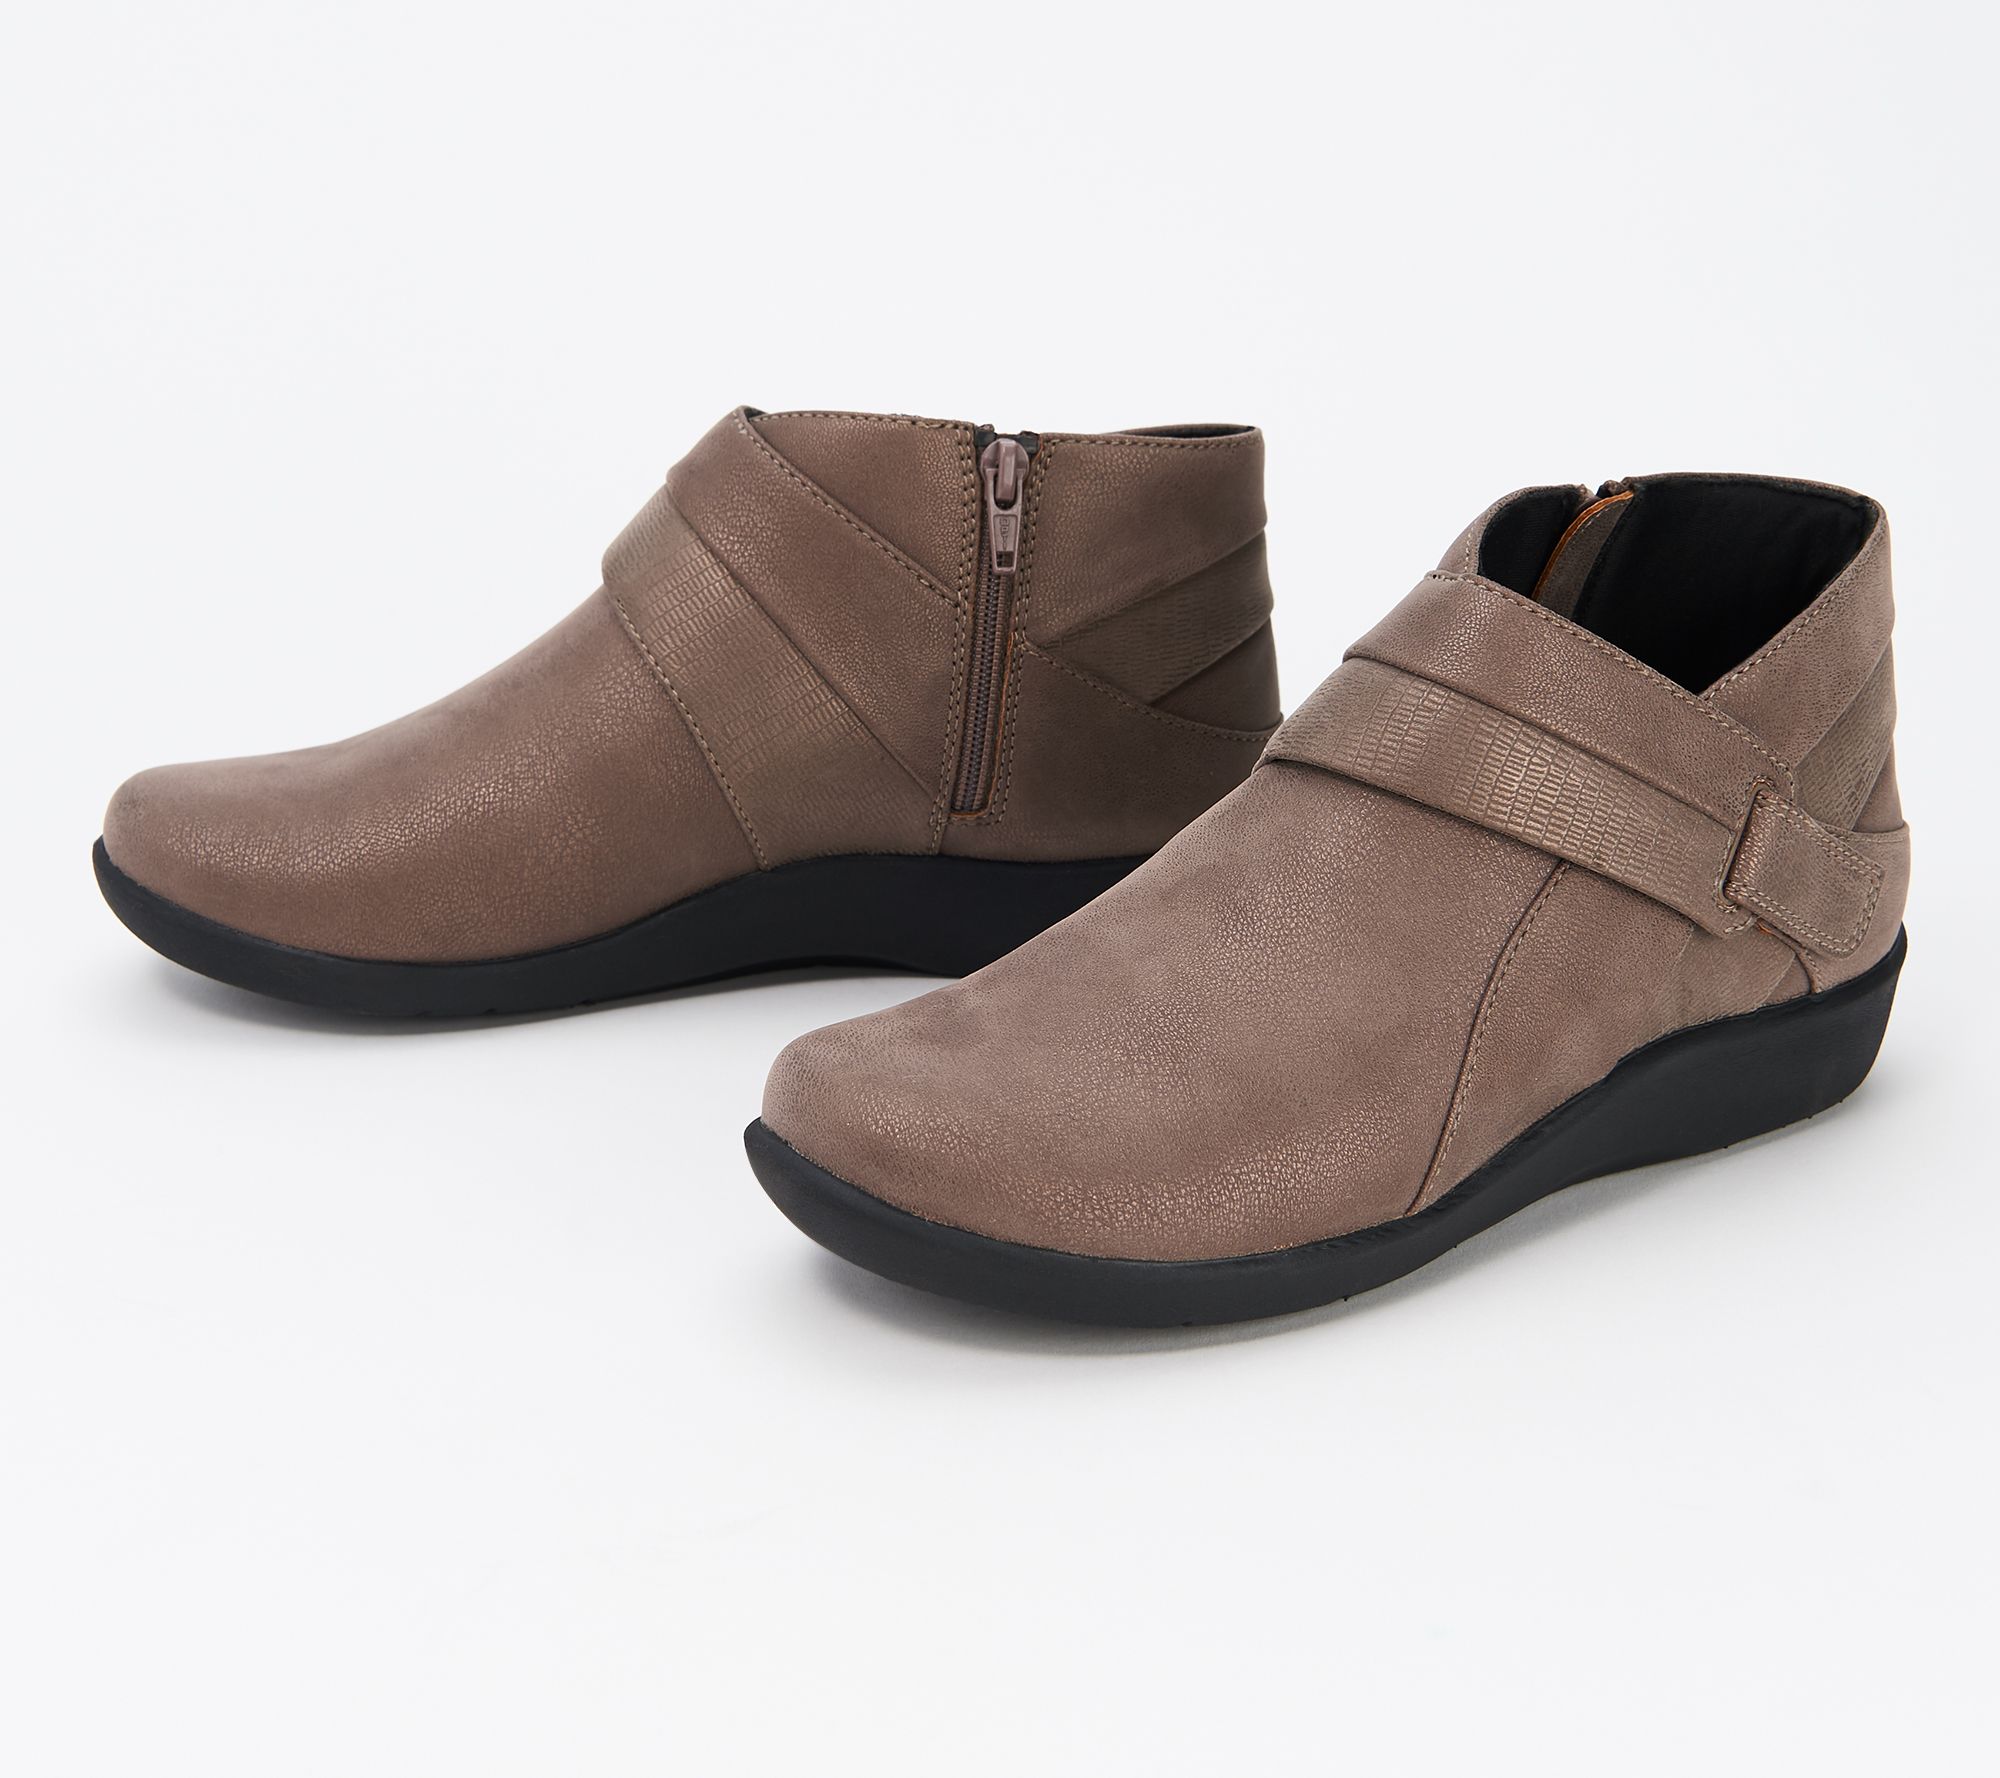 CLOUDSTEPPERS by Clarks Exposed Ankle 